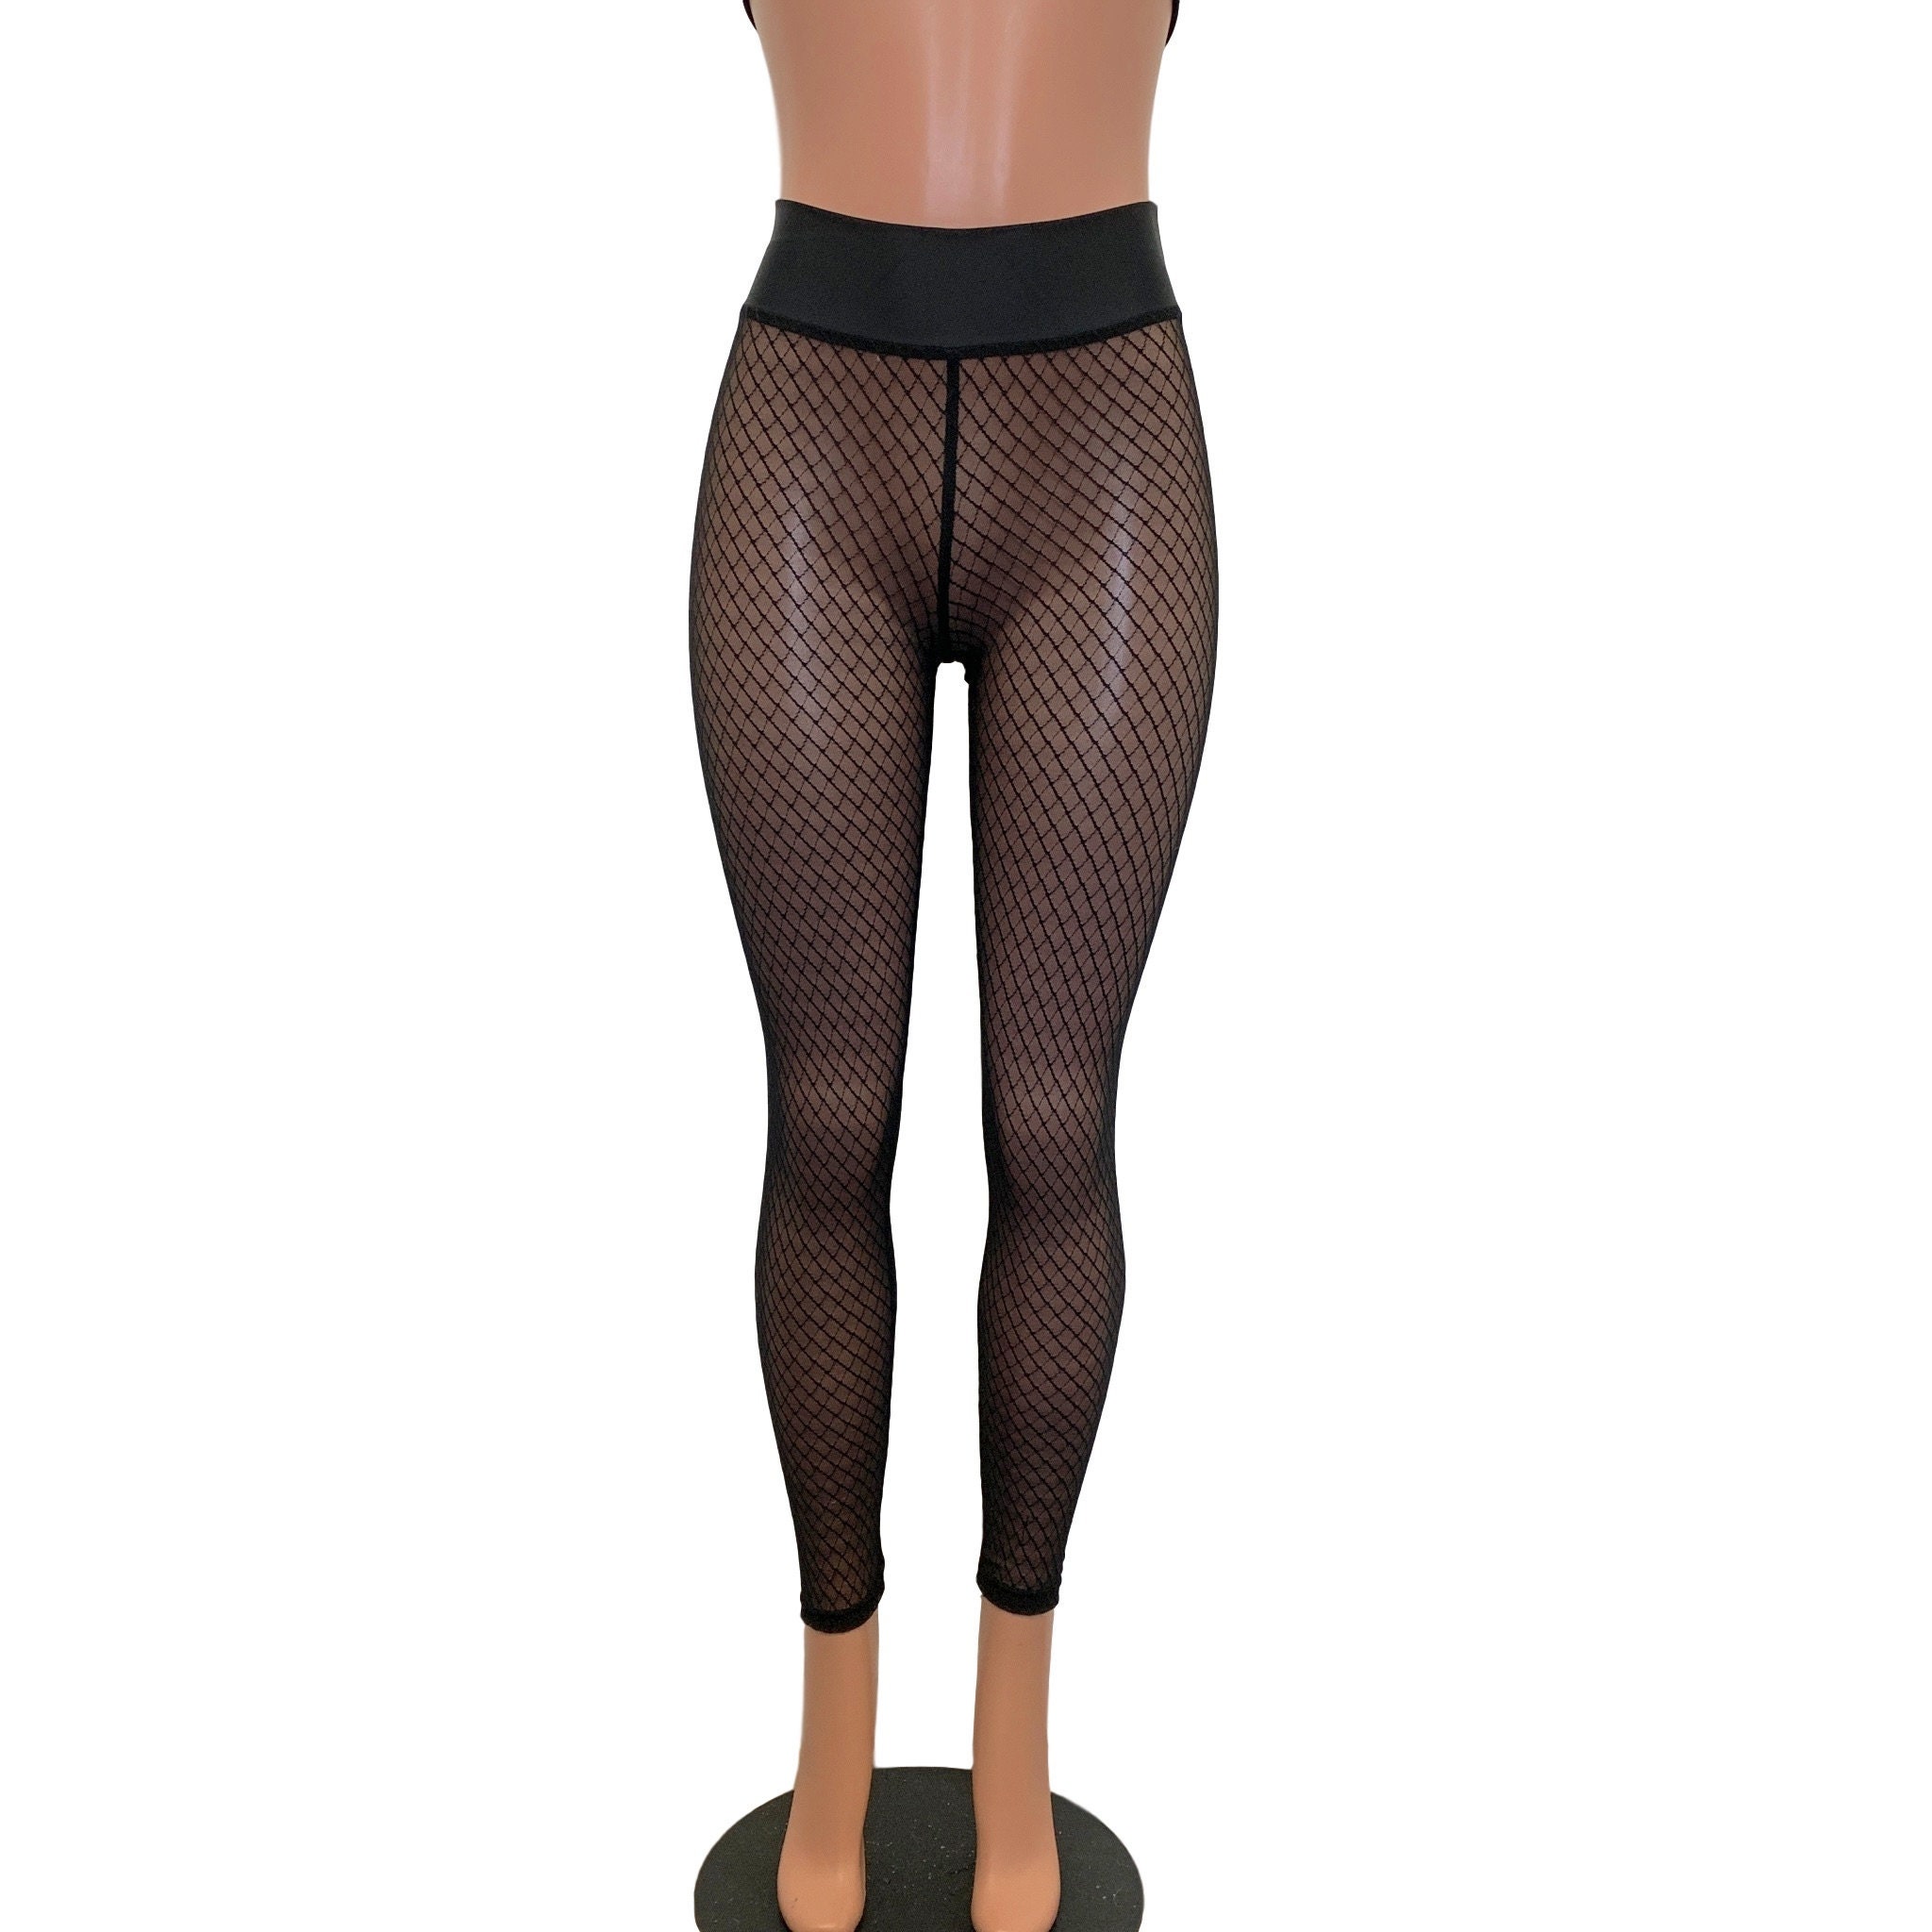 Buy Large Mesh Fishnet Tights Online in India 